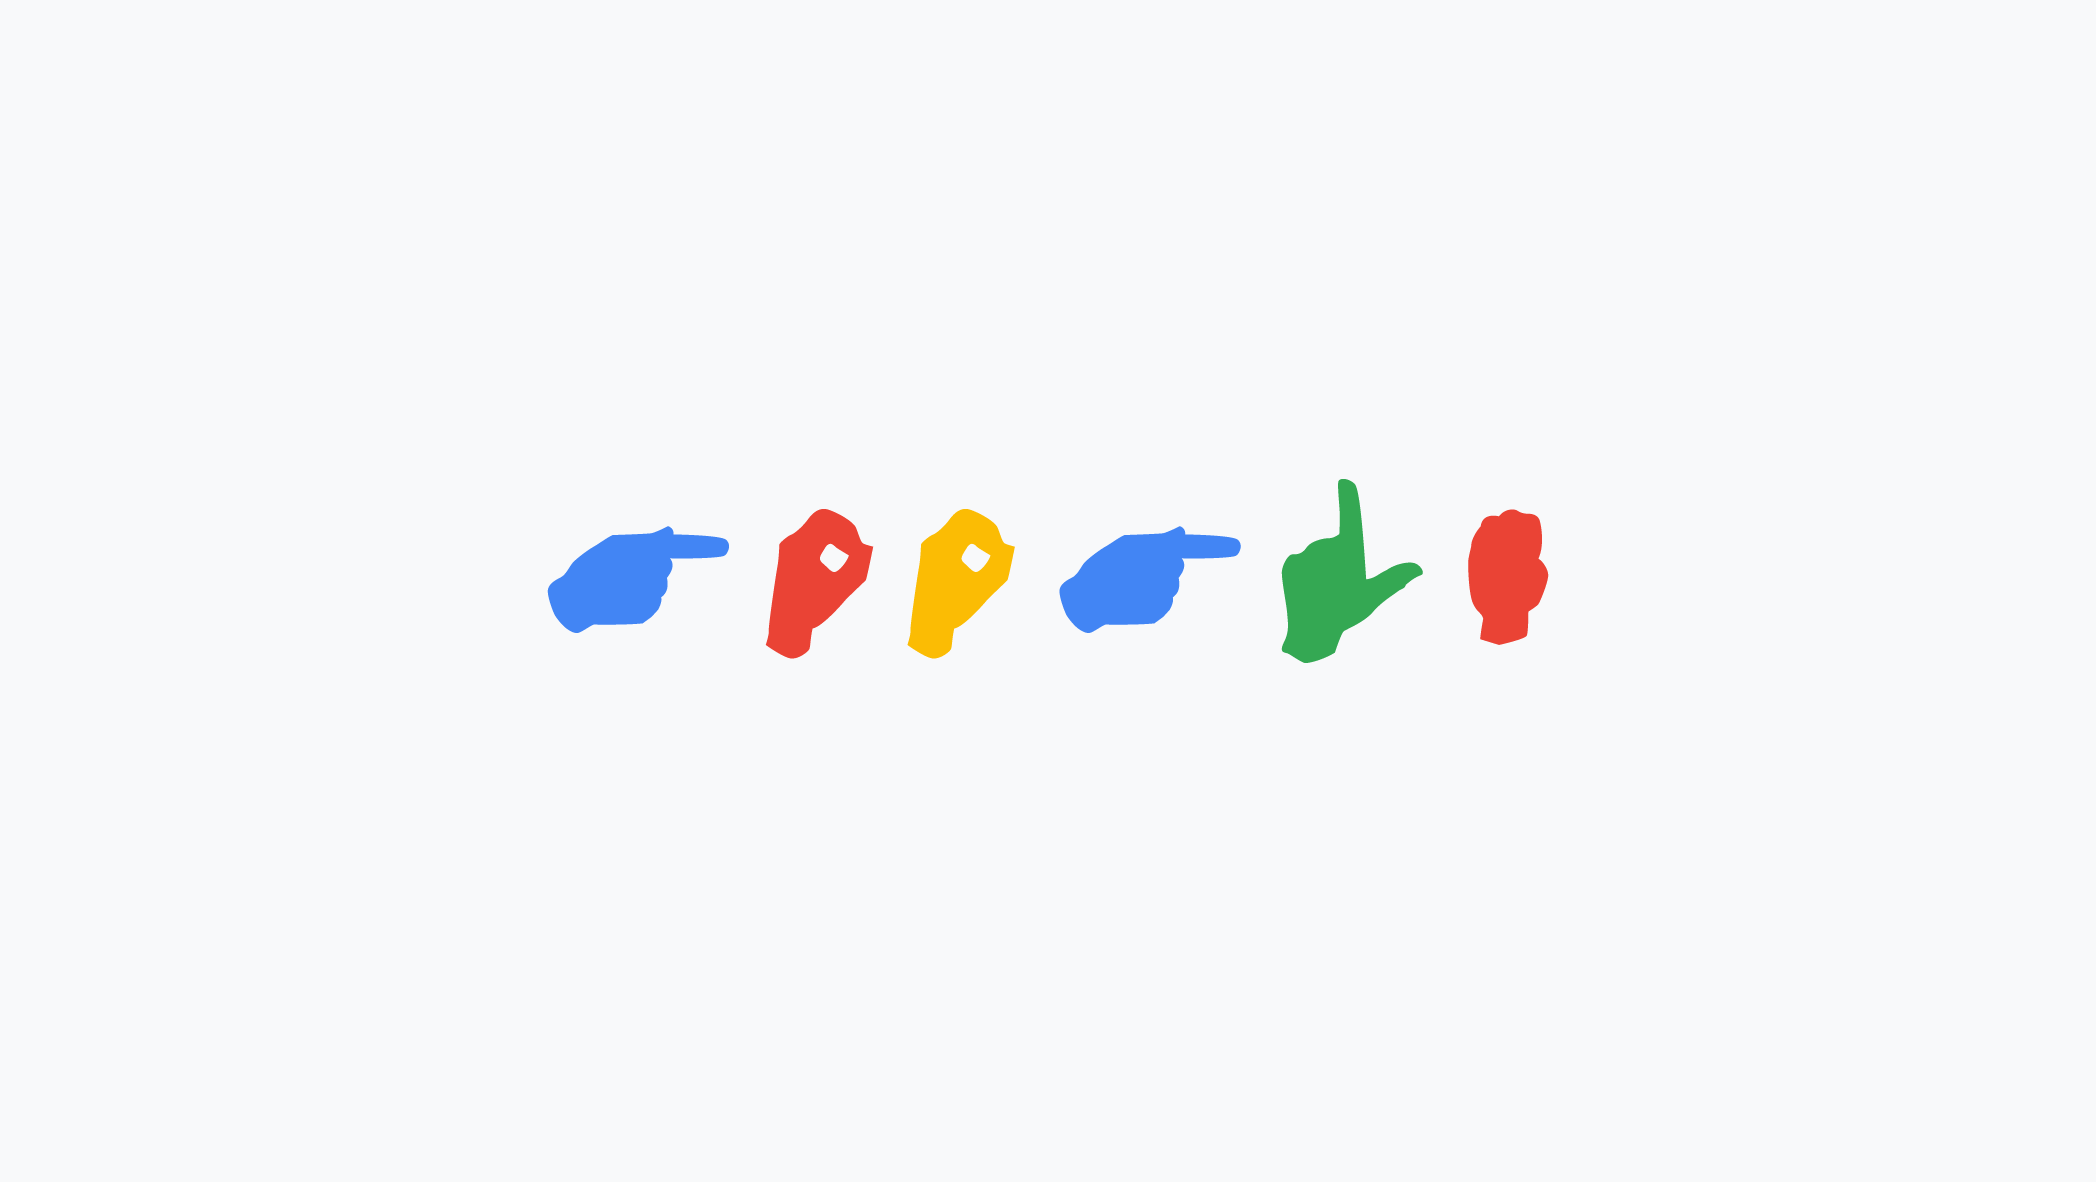 Google in american sign language displayed in the alternating google colors of blue, red, yellow, blue, green, and red